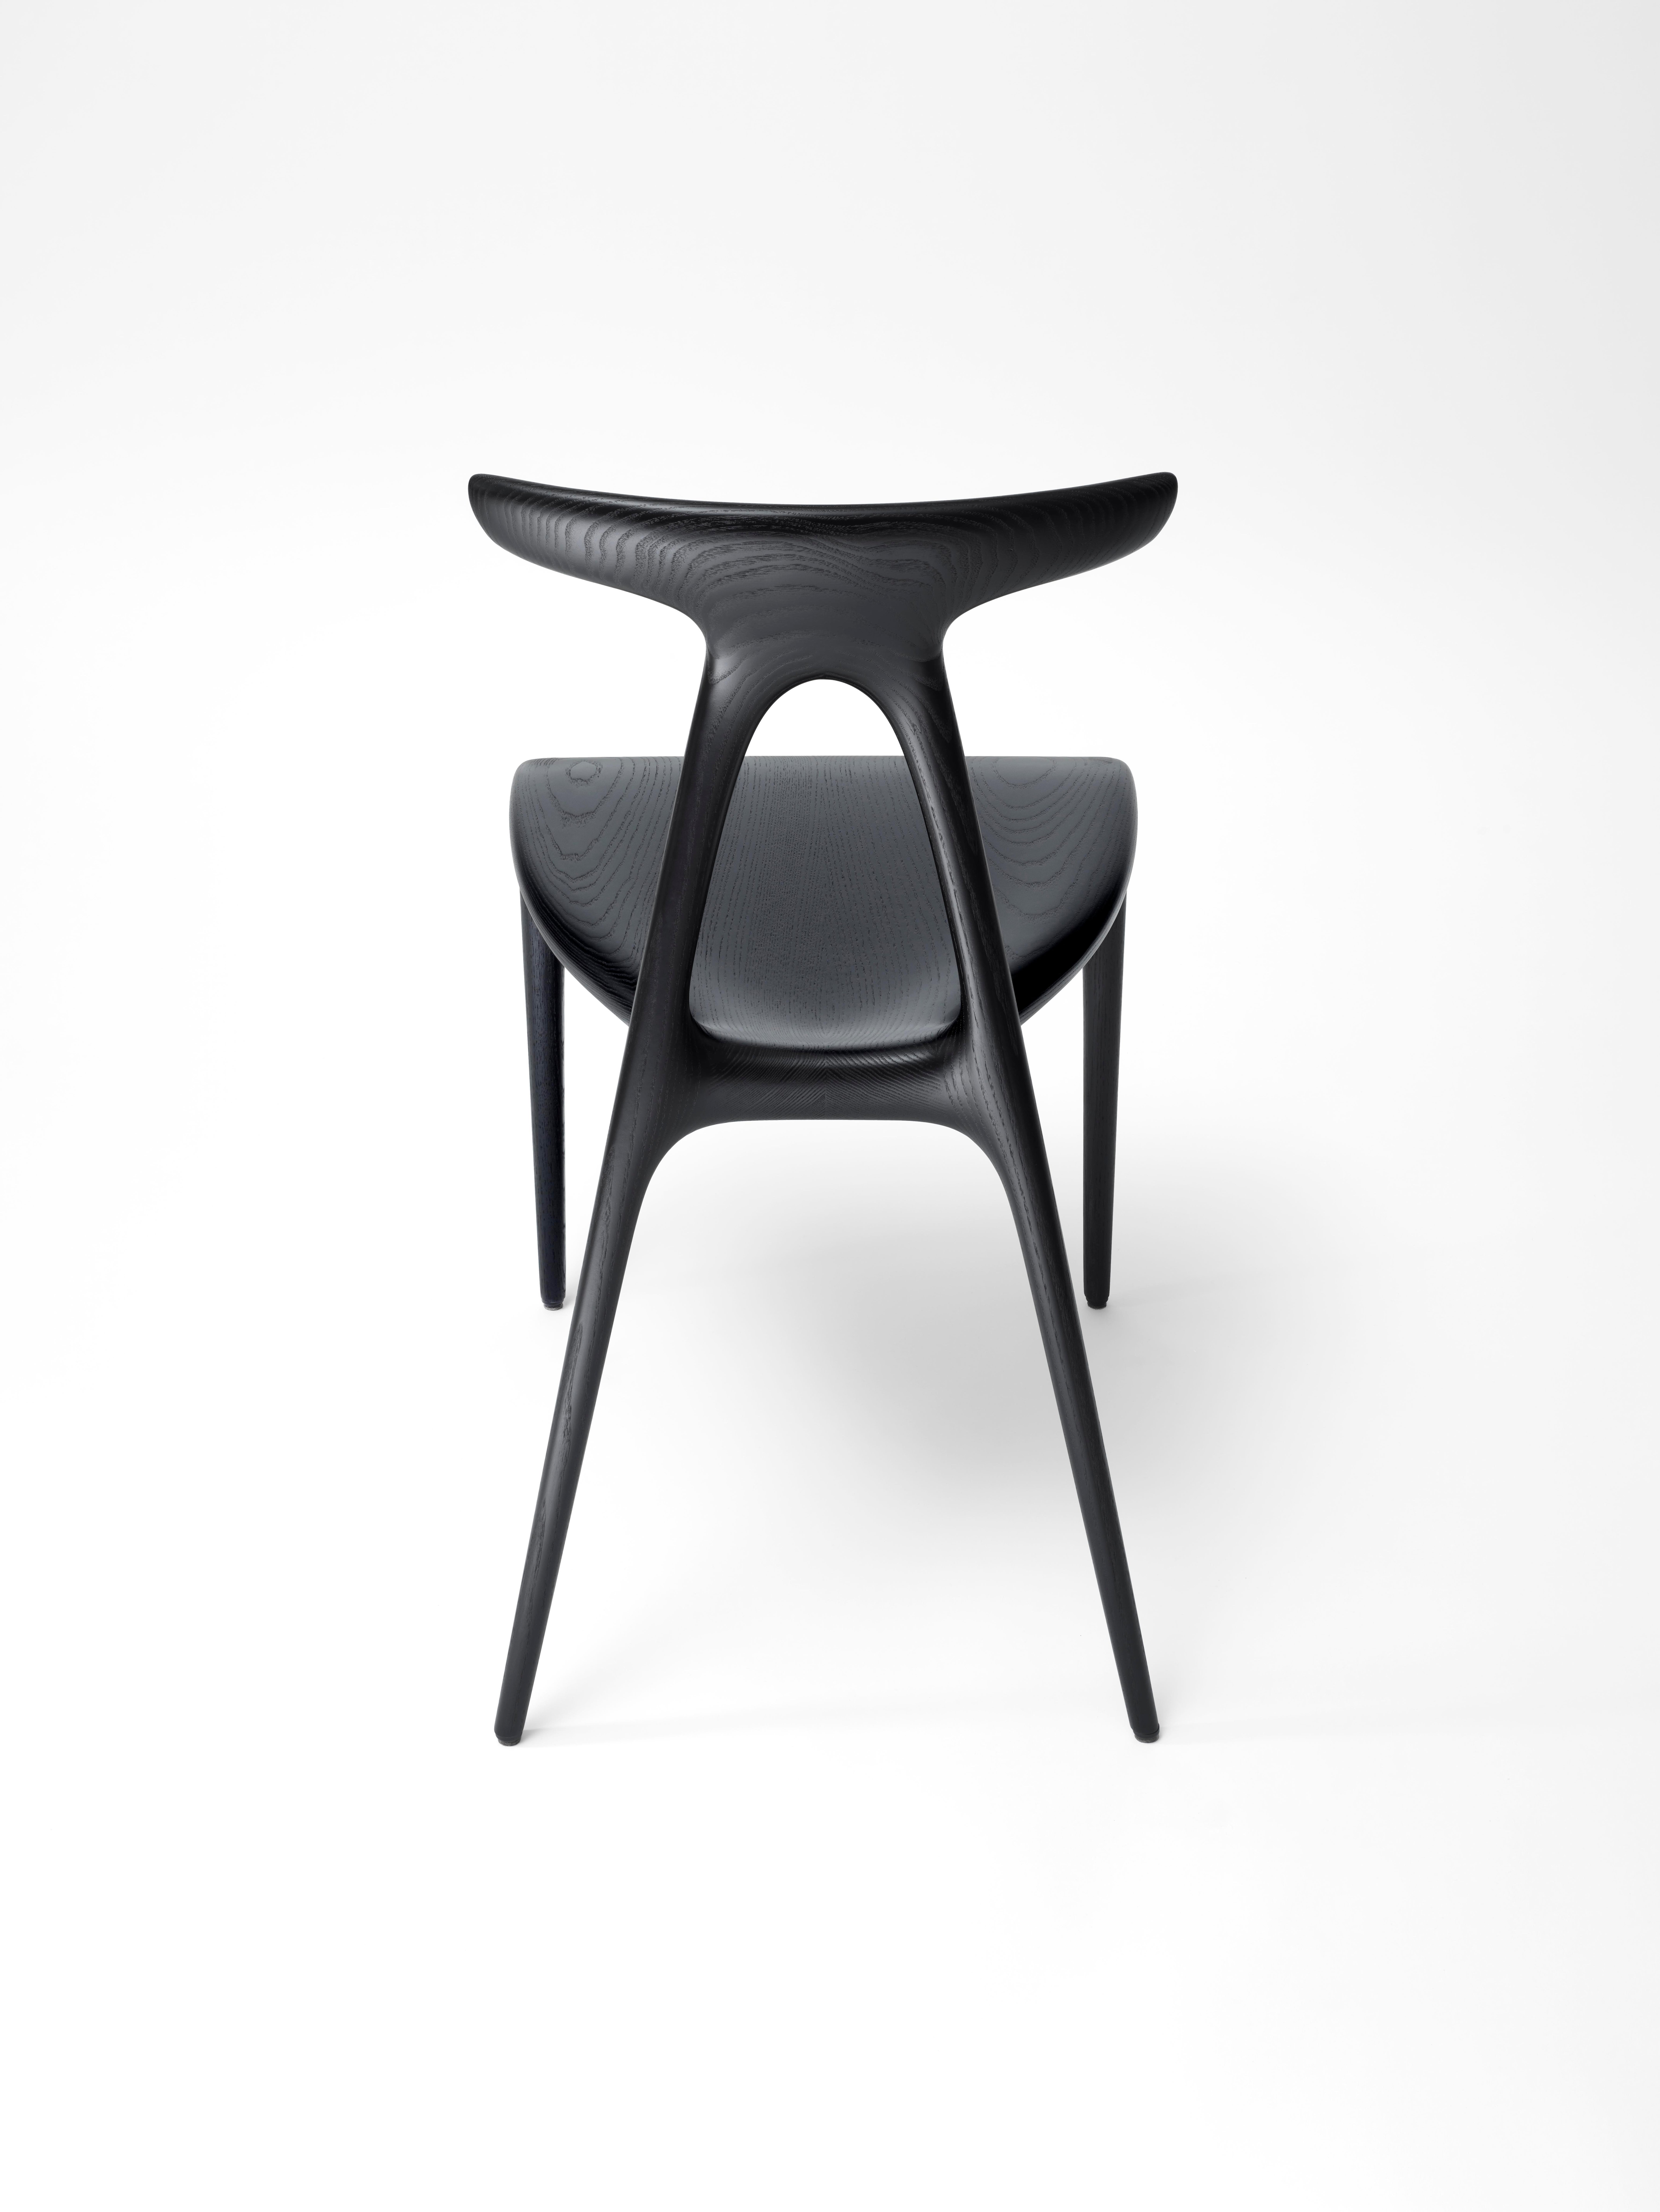 British Alpha, Solid Ebonised Ash Stackable Lightweight Dining Chair, Made in Ratio For Sale